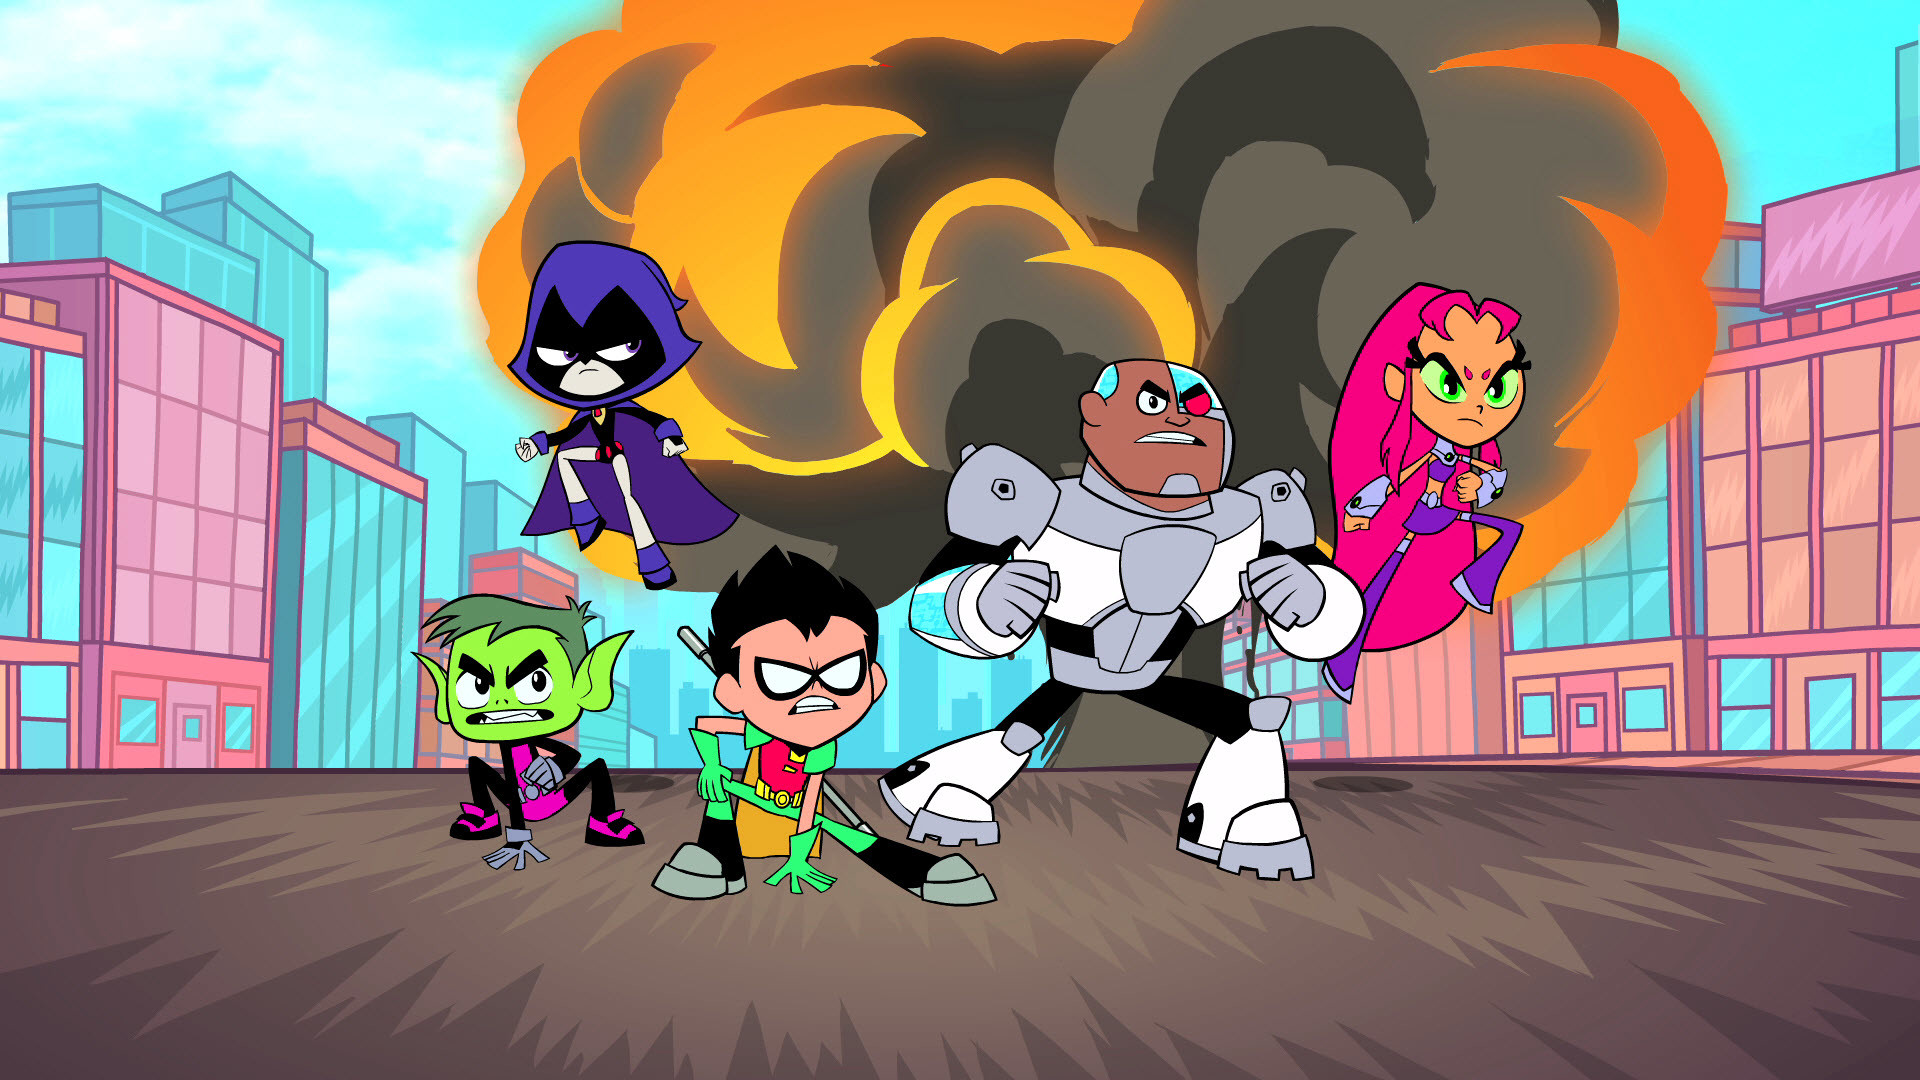 Teen Titans Go HD Wallpapers Backgrounds Wallpaper HD Wallpapers Pinterest Teen titans, Hd wallpaper and Wallpaper